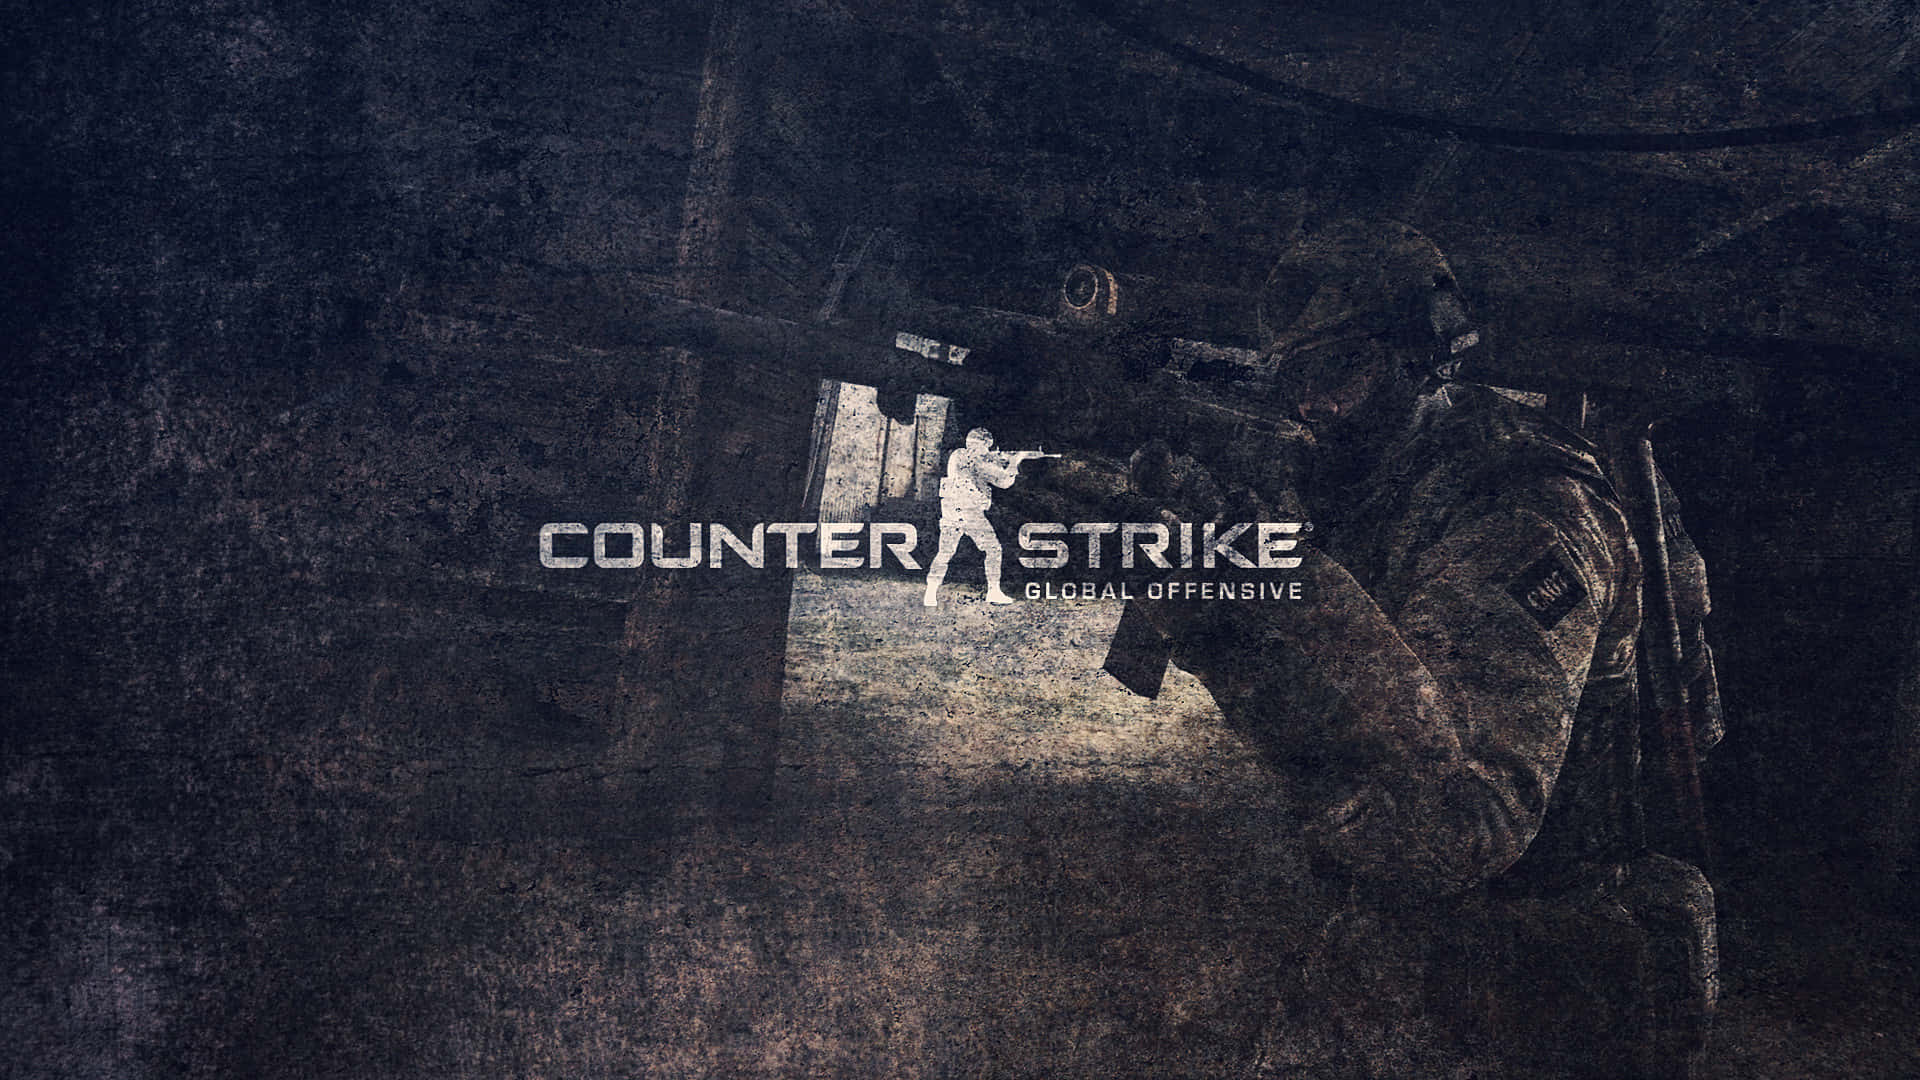 Intense Graphic Detail of Counter-Strike: Global Offensive Game